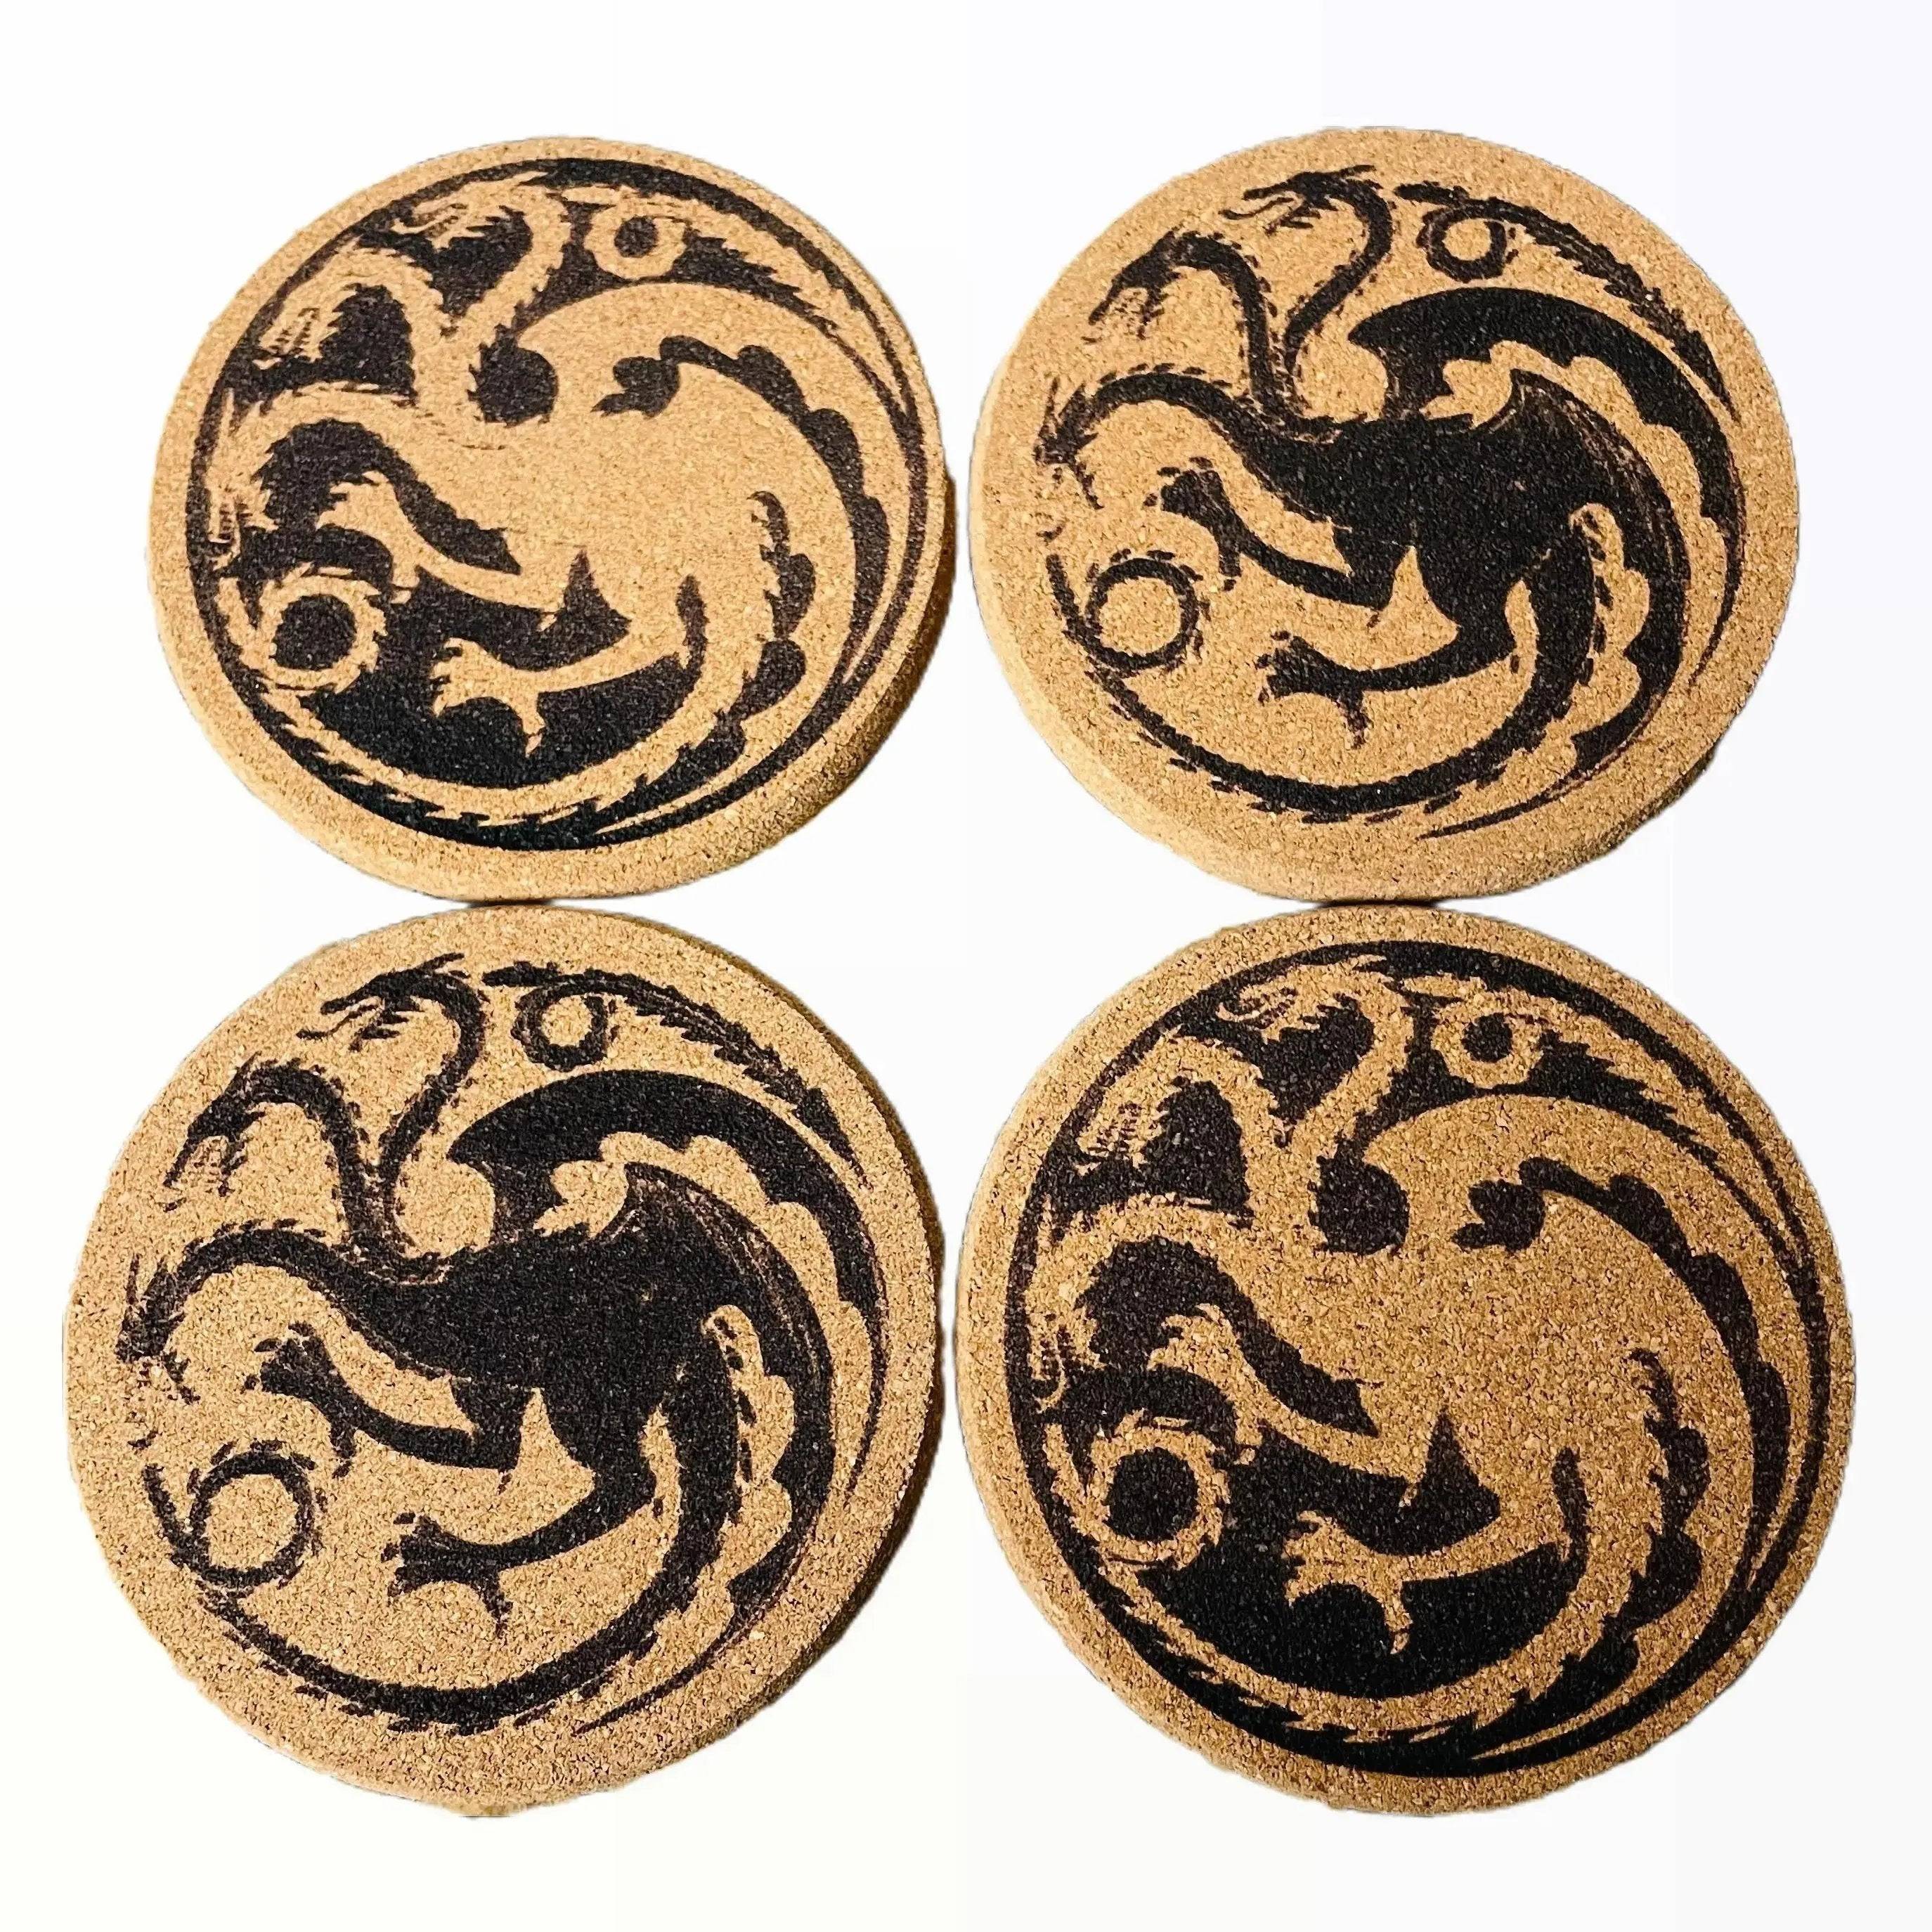 Dragon Engraved Cork Coasters:  Enhance Your Table with Iconic Design